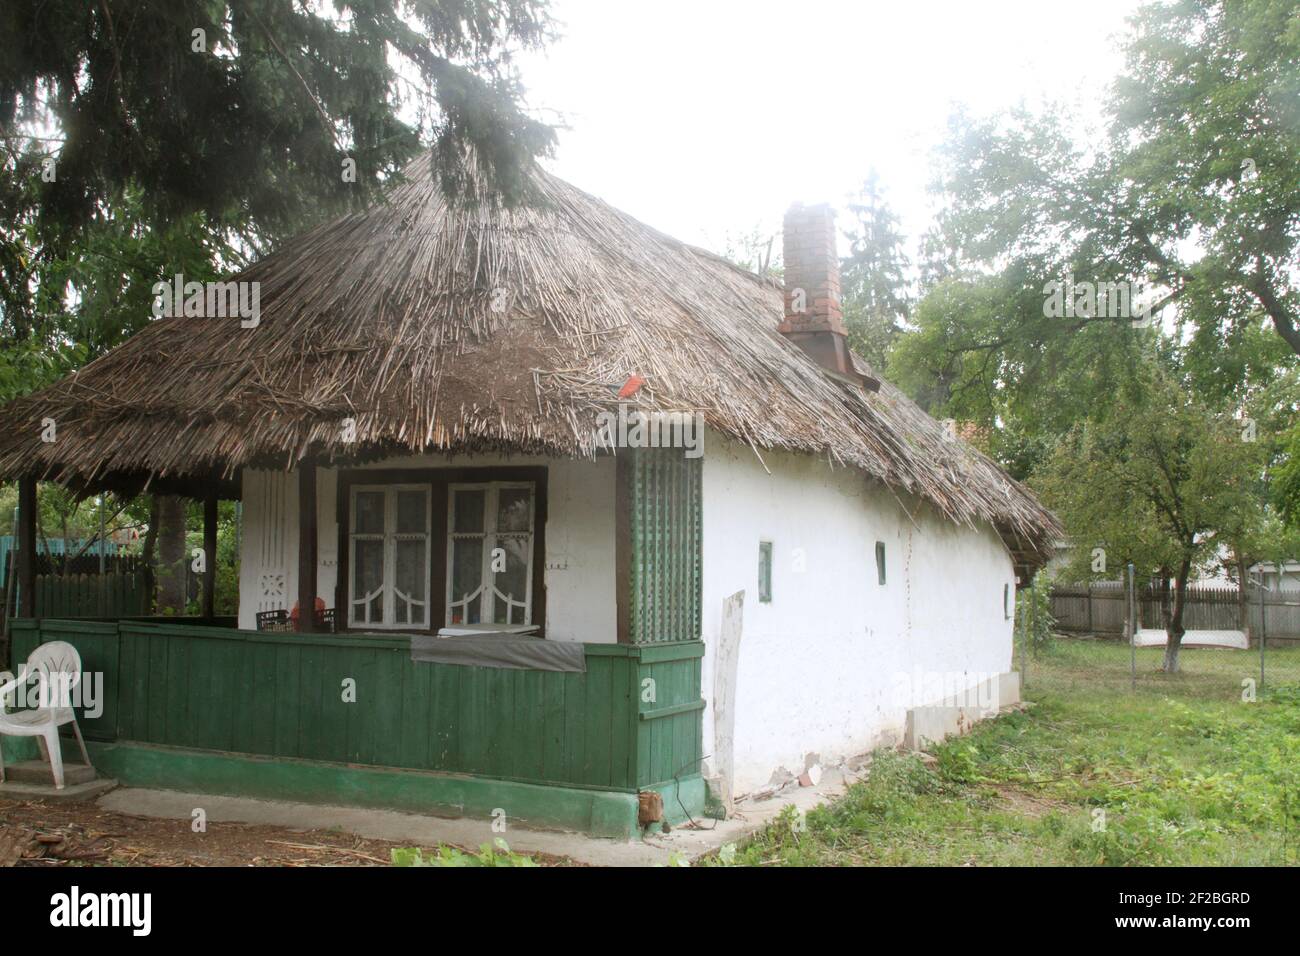 Simple traditional mud house with thatched roof in Snagov, Romania Stock Photo